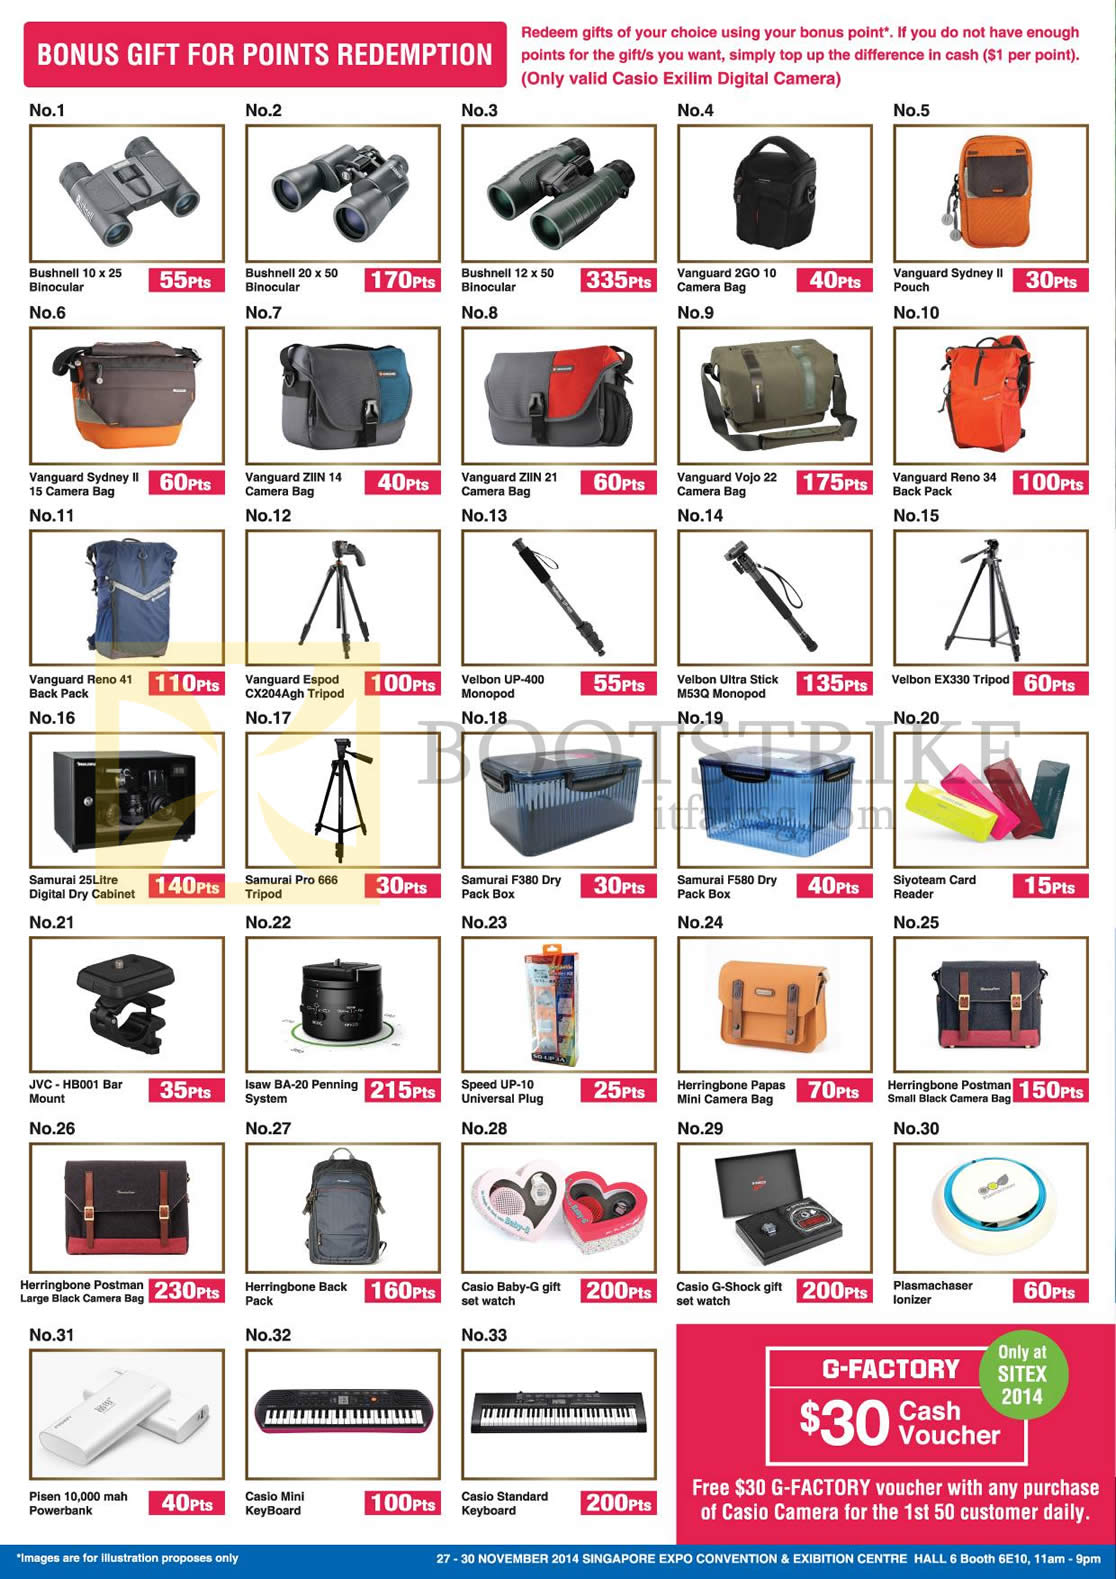 SITEX 2014 price list image brochure of Casio Digital Cameras Gift For Points Redemption